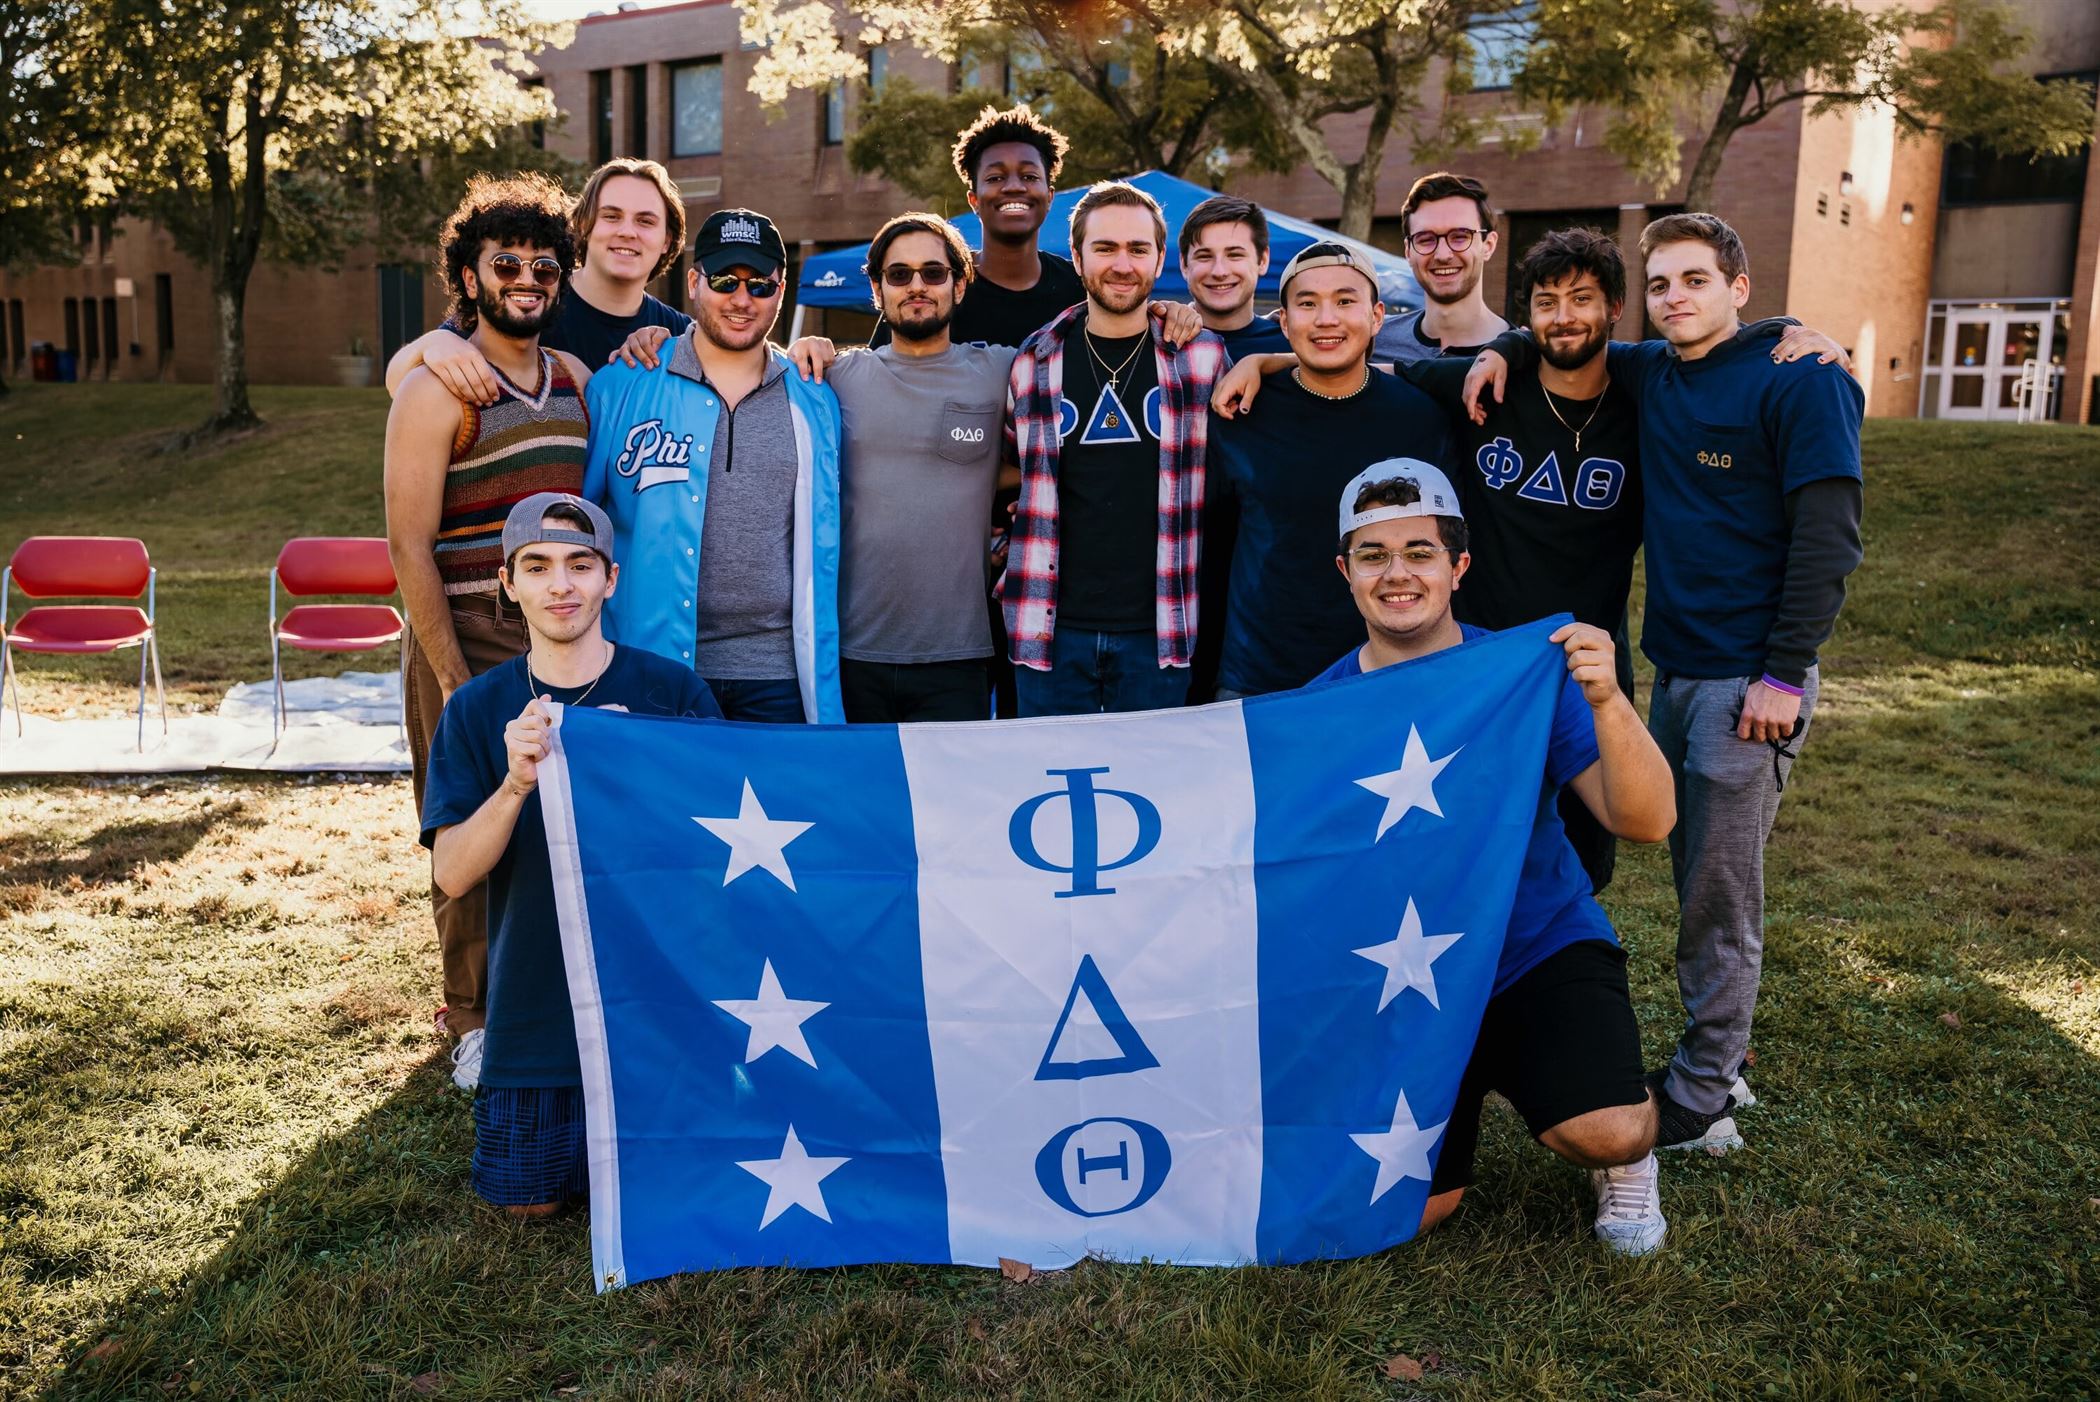 Members of Phi Delta Theta have faced many challenges as they tried to start their fraternity throughout the pandemic. Photo courtesy of Ryan Breyta